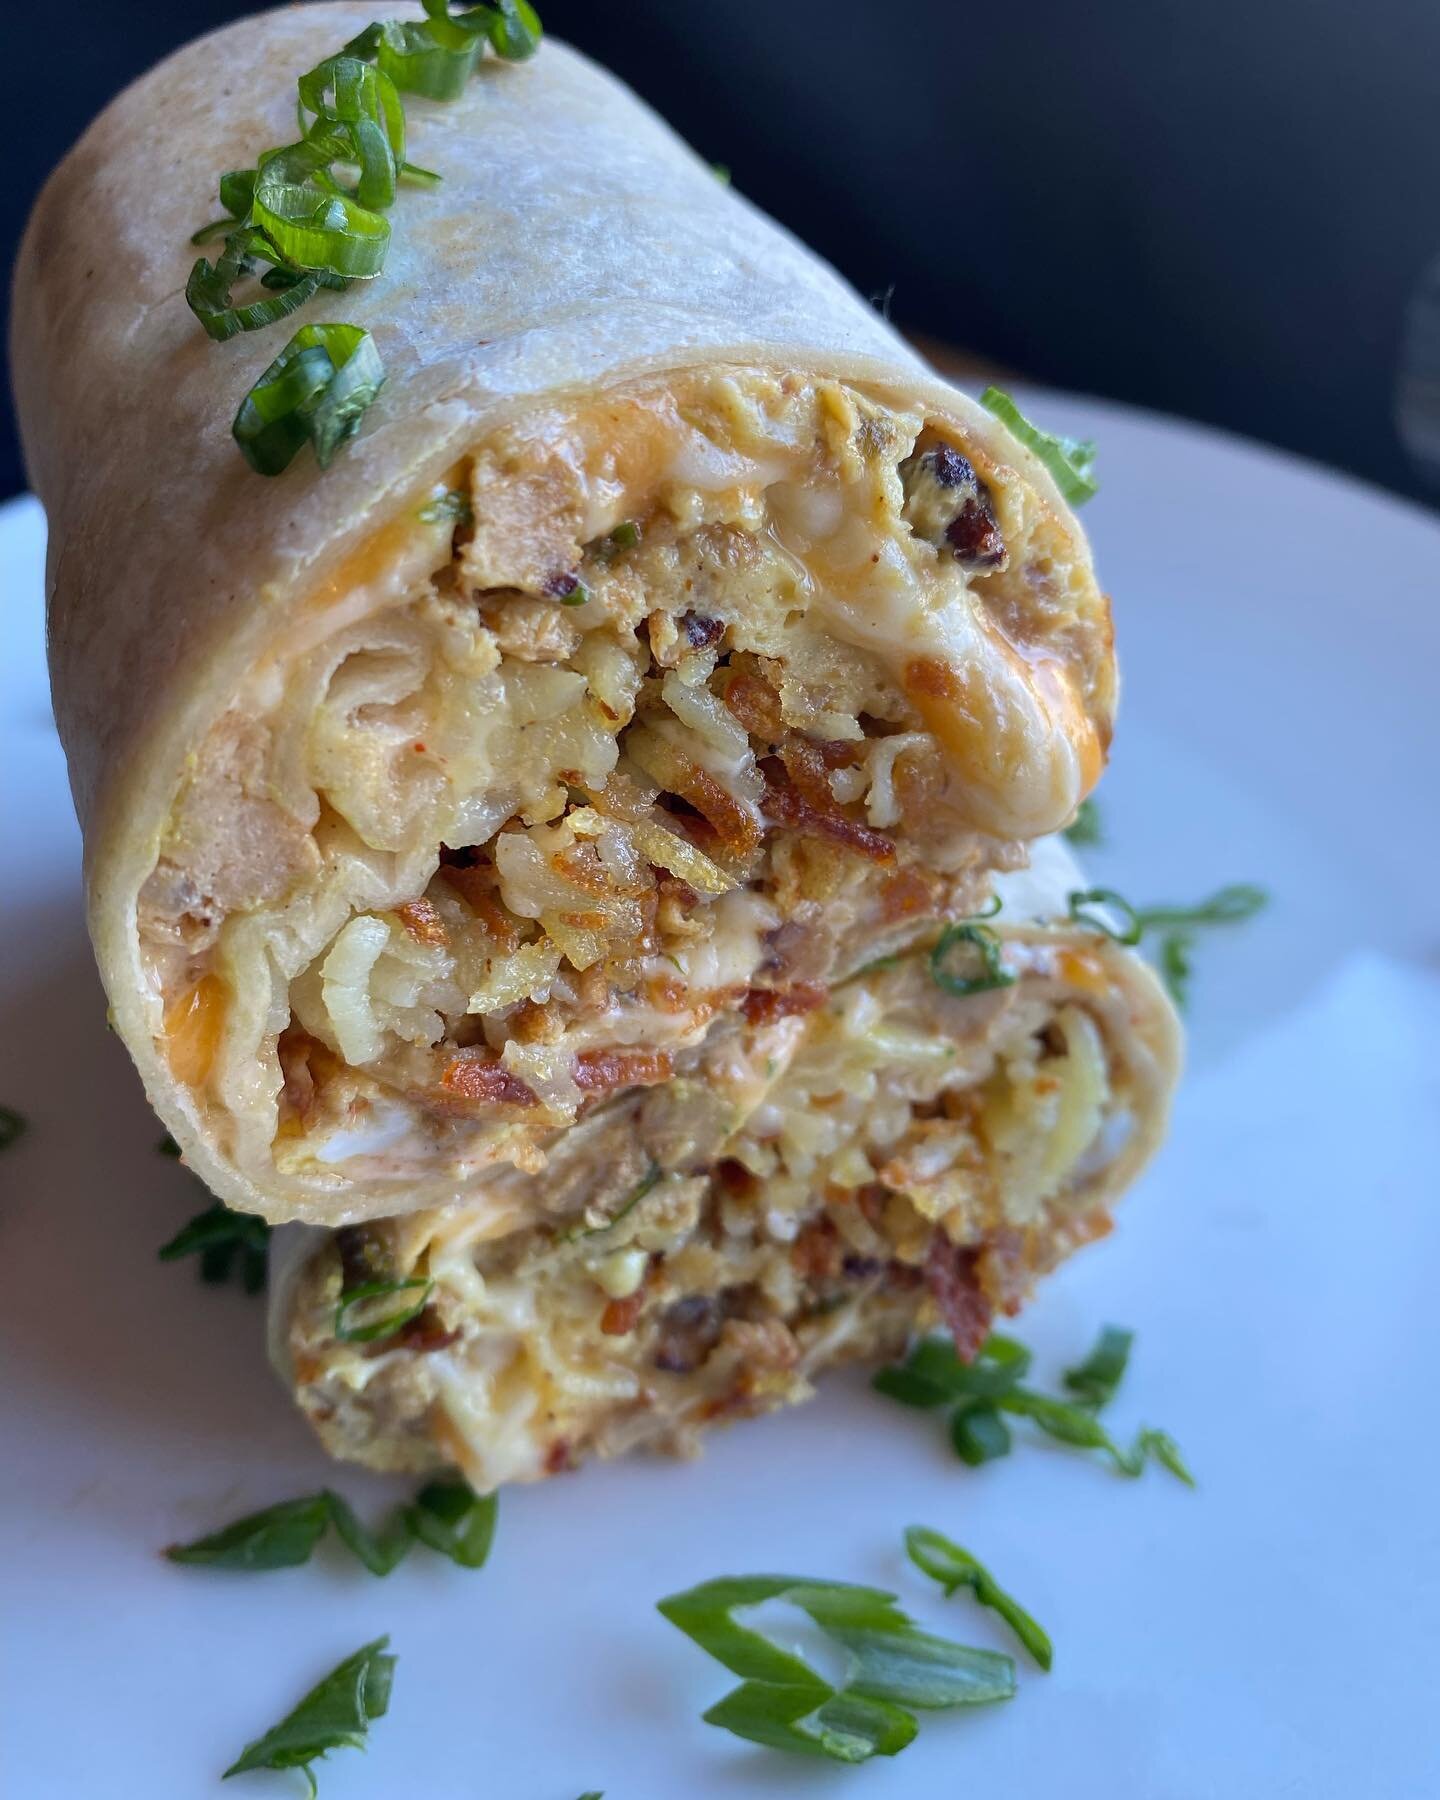 New Menu Item- Rosaline Breakfast Wrap! 🌯

Scrambled eggs, peppers, seasoned pork, shredded crispy potatoes, caramelized onions, mixed cheese and our new signature southwest sauce. 

#breakfastofchampions #breakfasttime #breakfastclub #breakfast #br